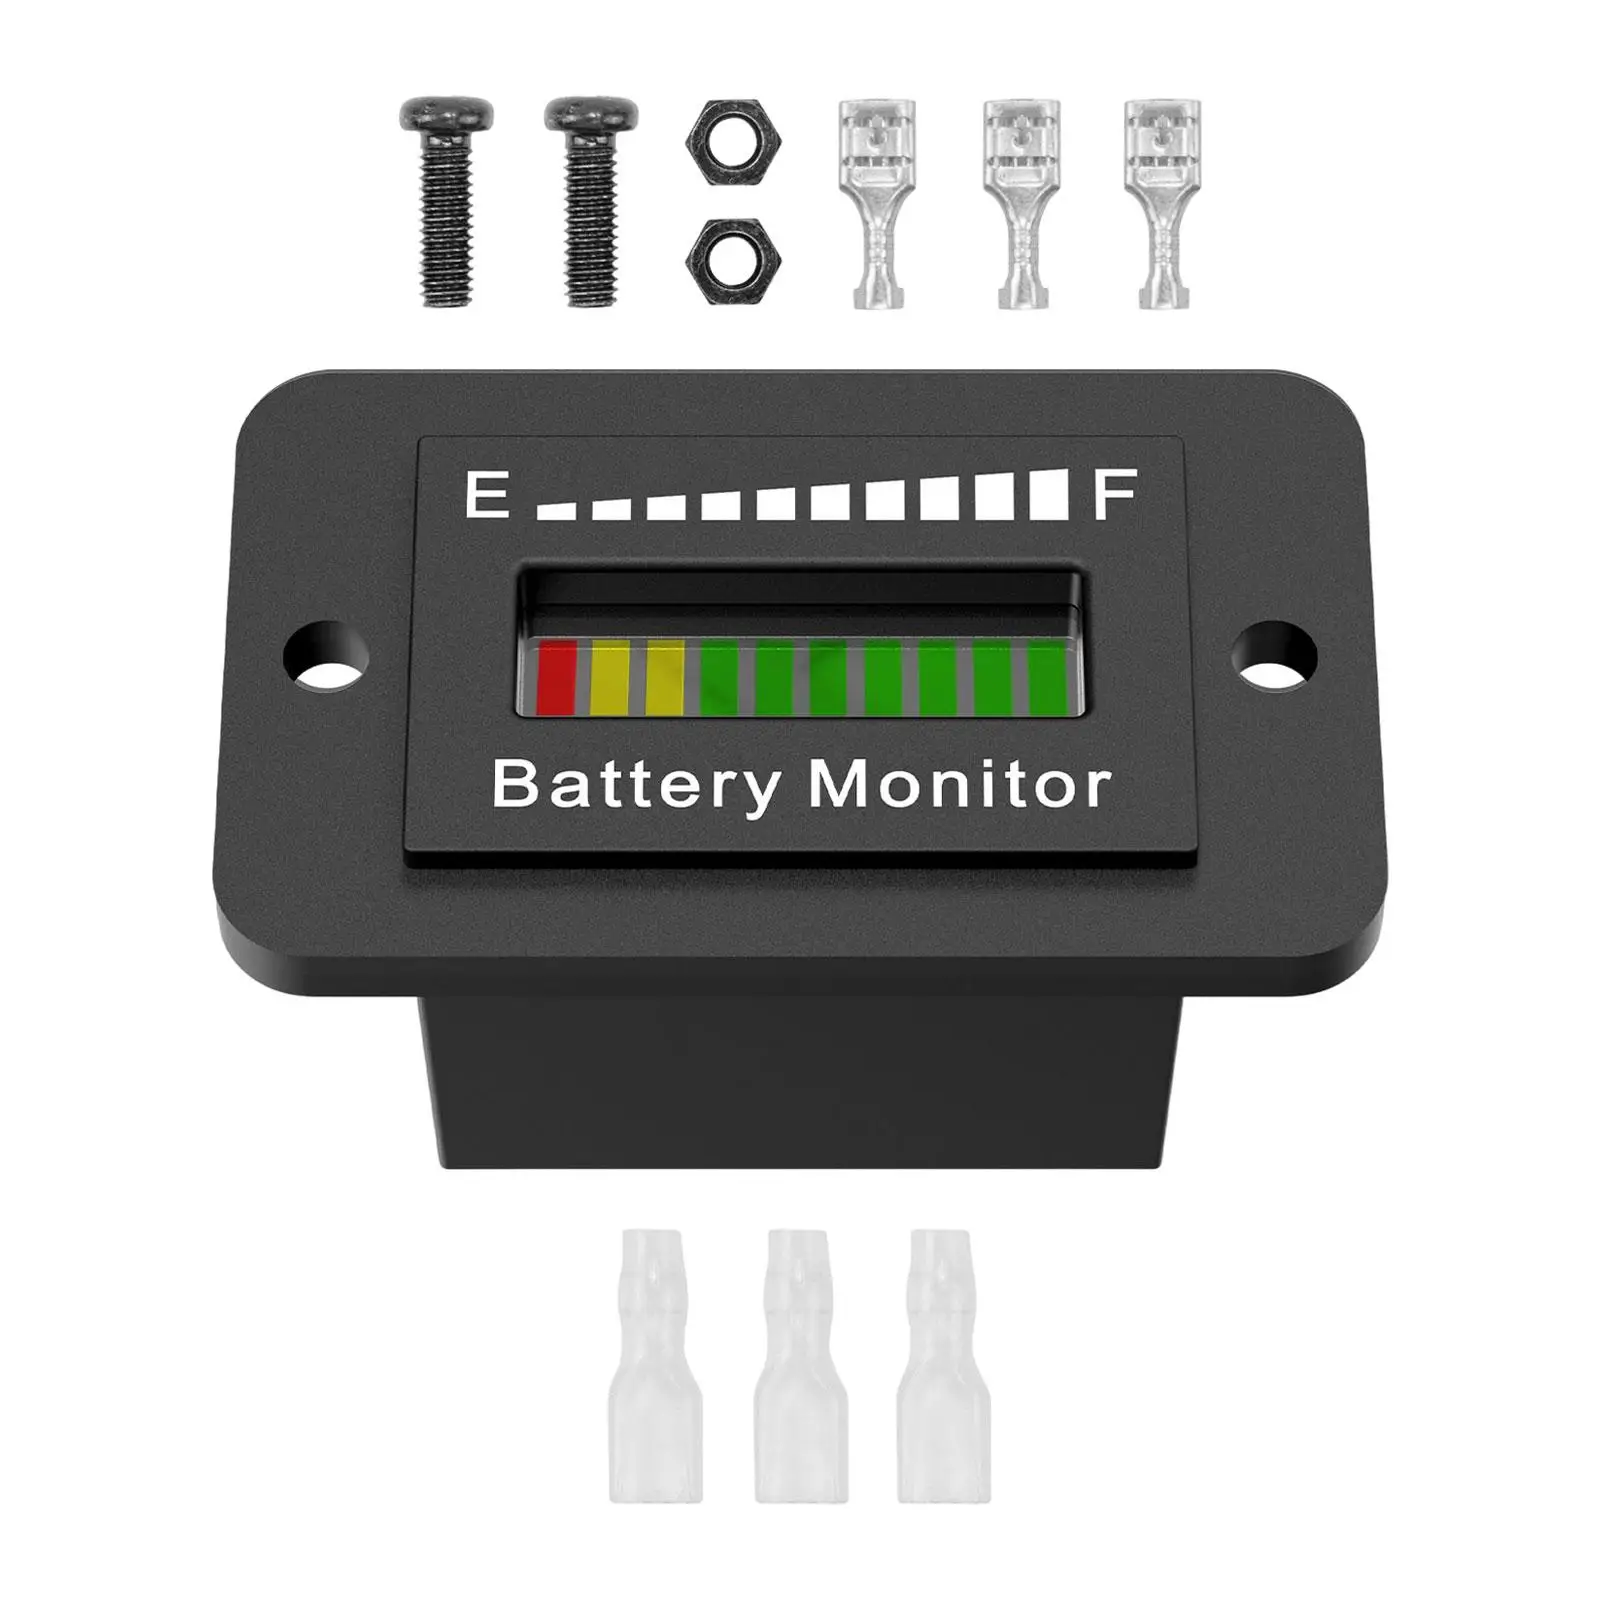 Battery Capacity Indicator IP65 Waterproof Battery Meter Battery Monitor for Golf Cart Forklift Scrubber Machine Trailer RV